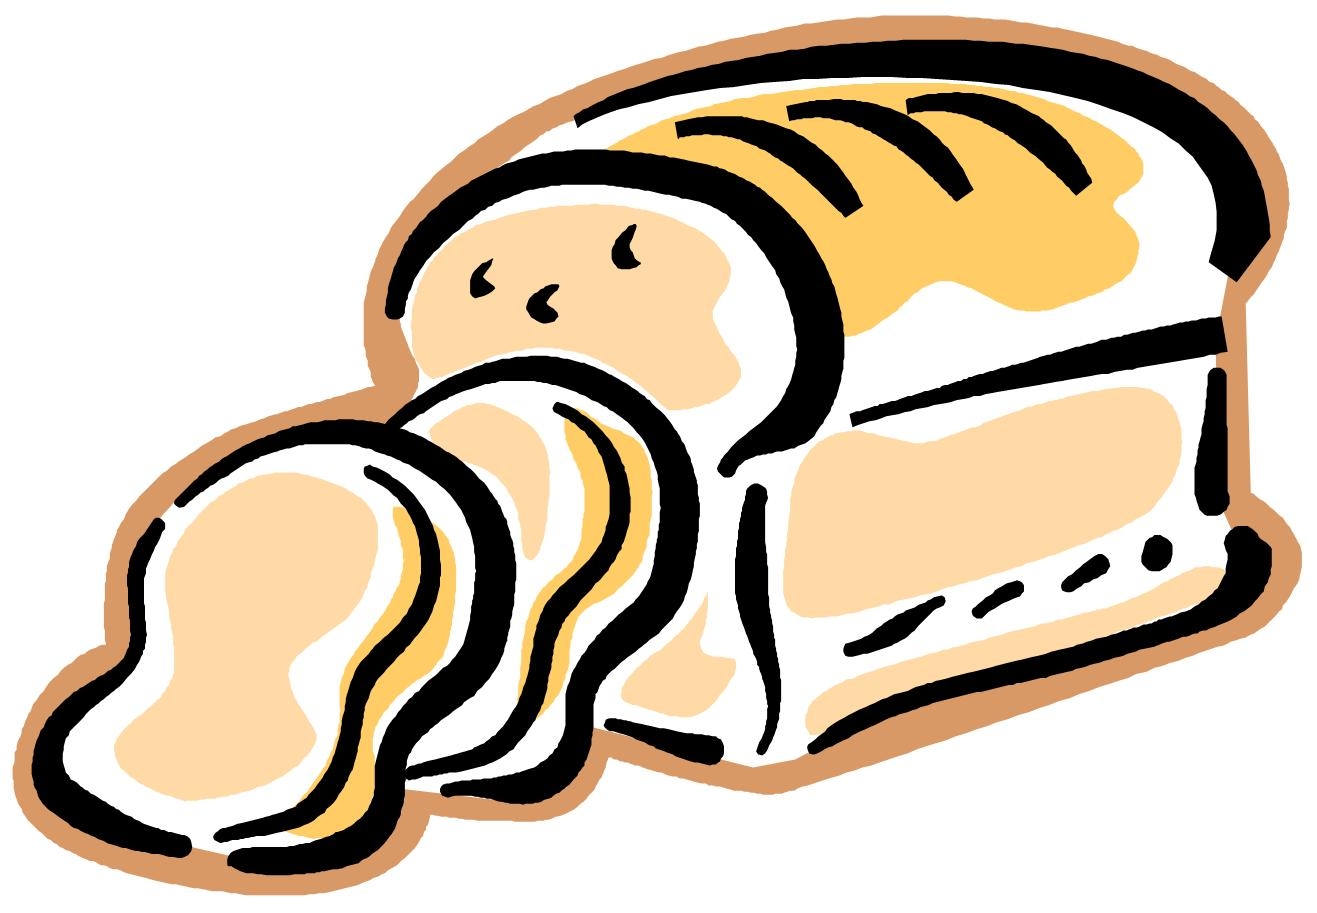 Unique loaf of collection. Bread clipart braed